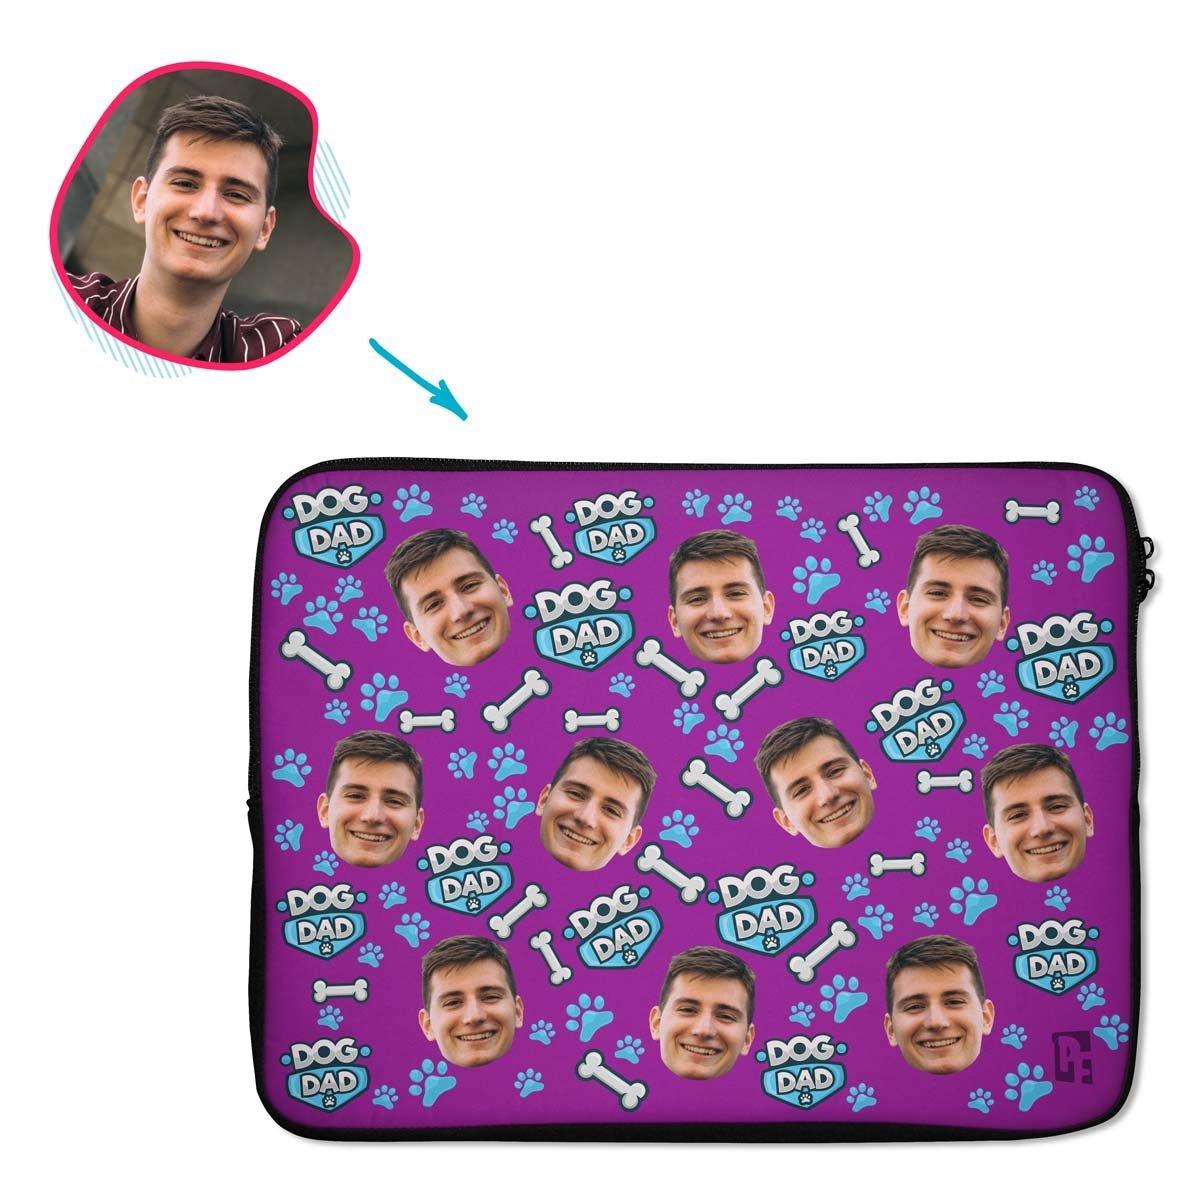 purple Dog Dad laptop sleeve personalized with photo of face printed on them